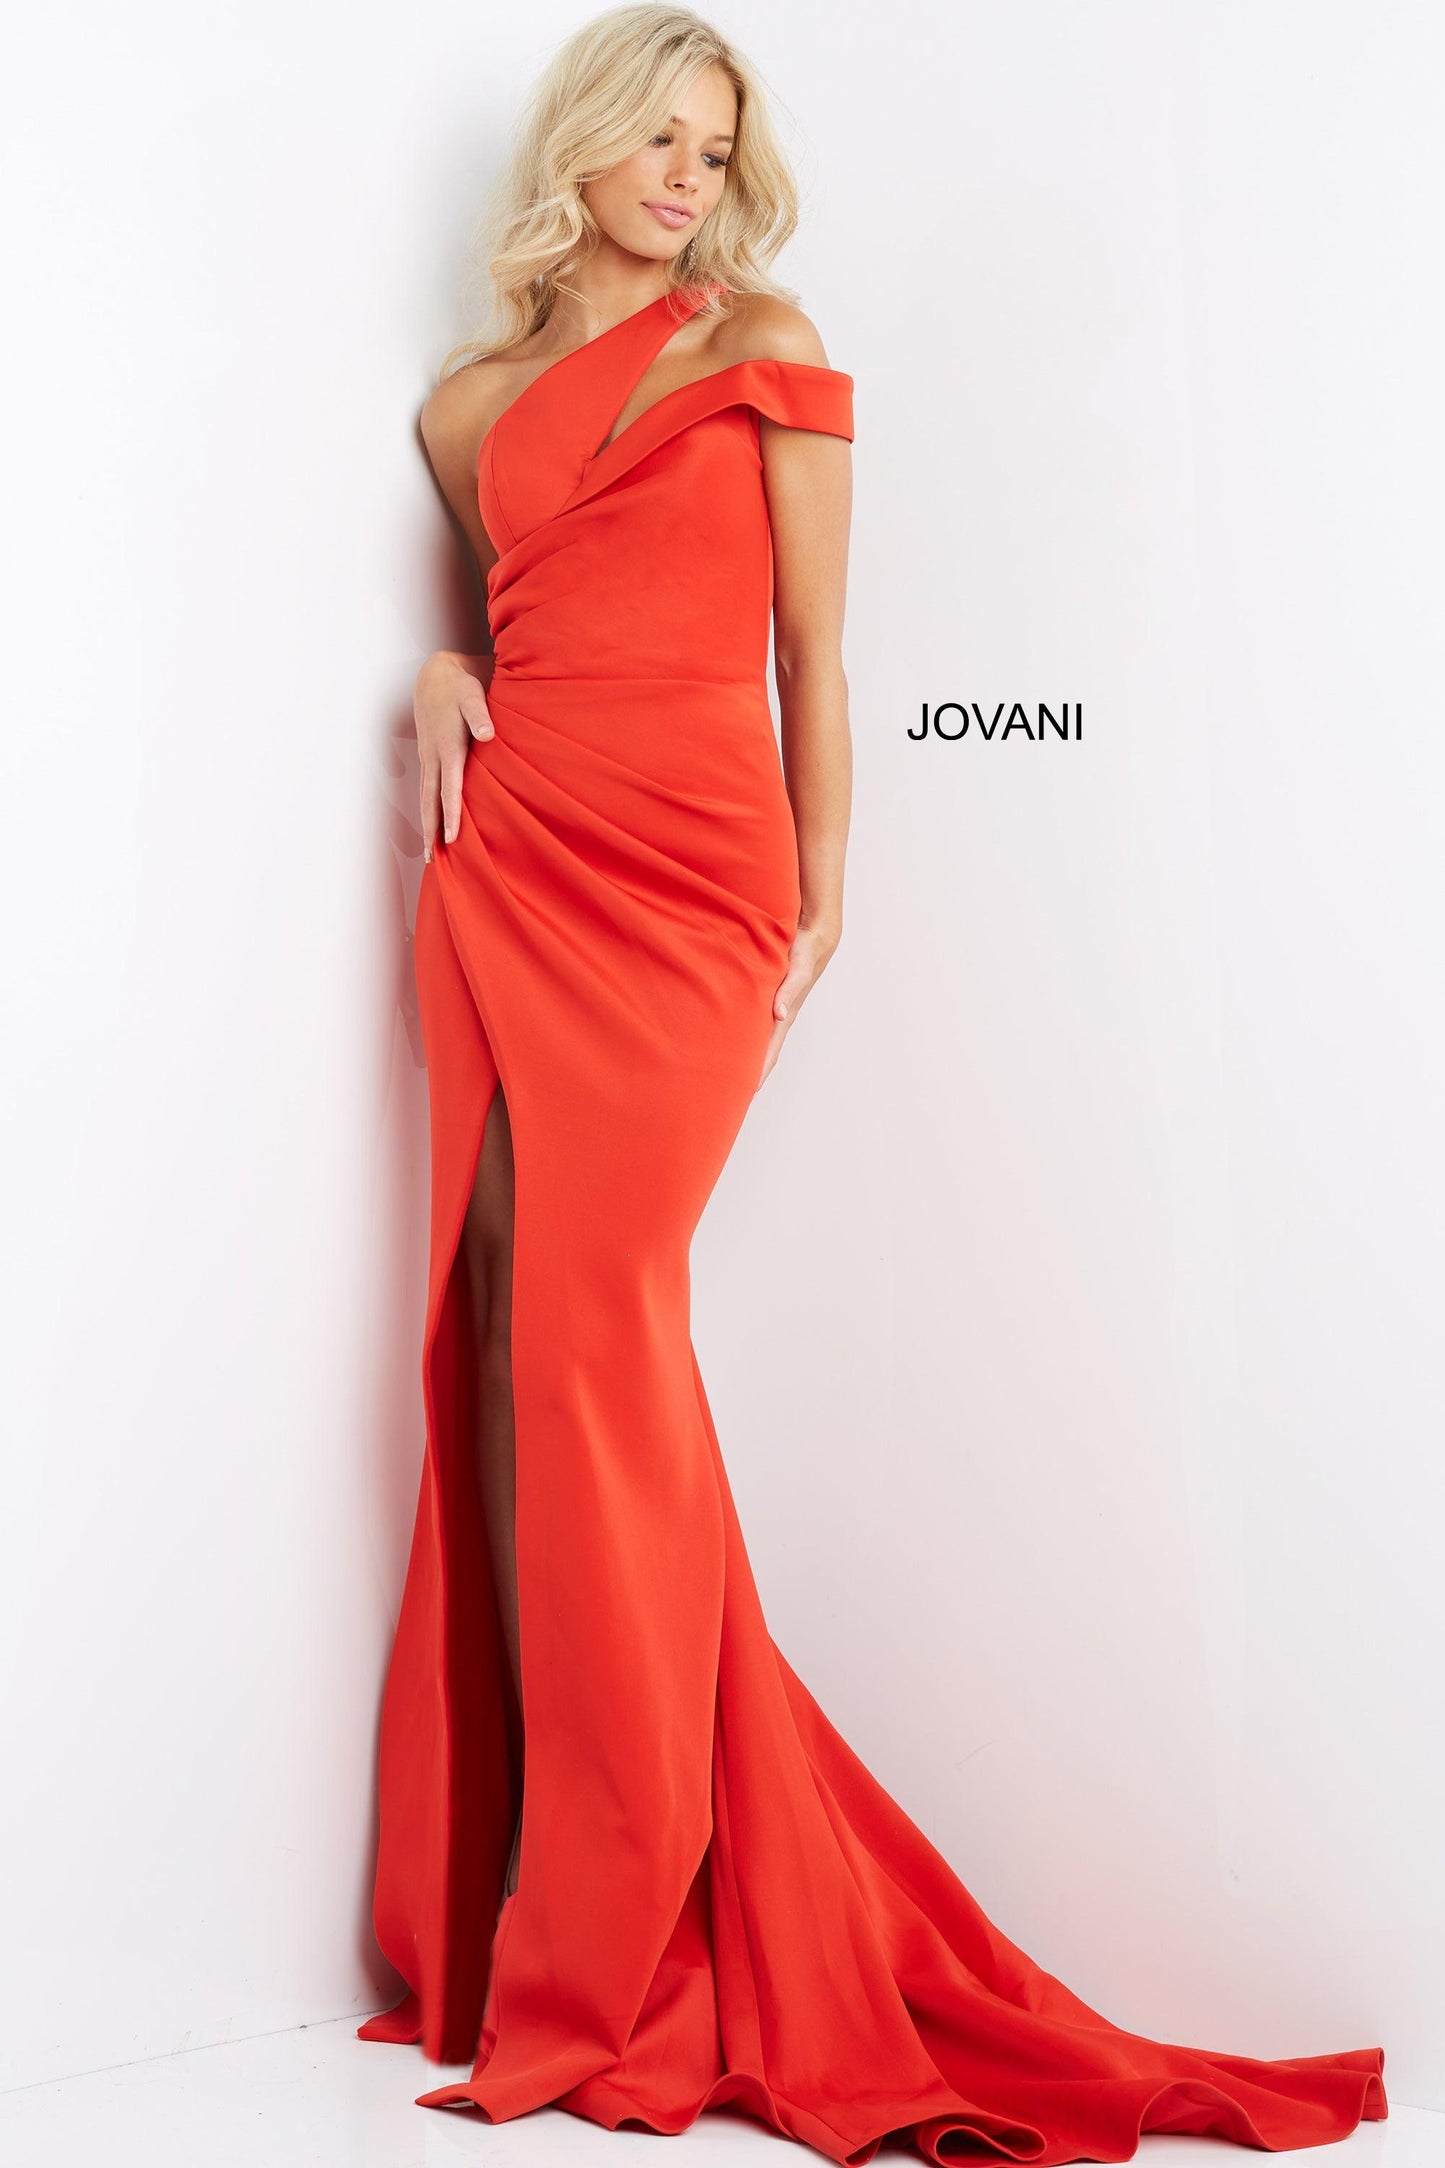 Jovani One Shoulder Long Mermaid Gown 04222 - The Dress Outlet